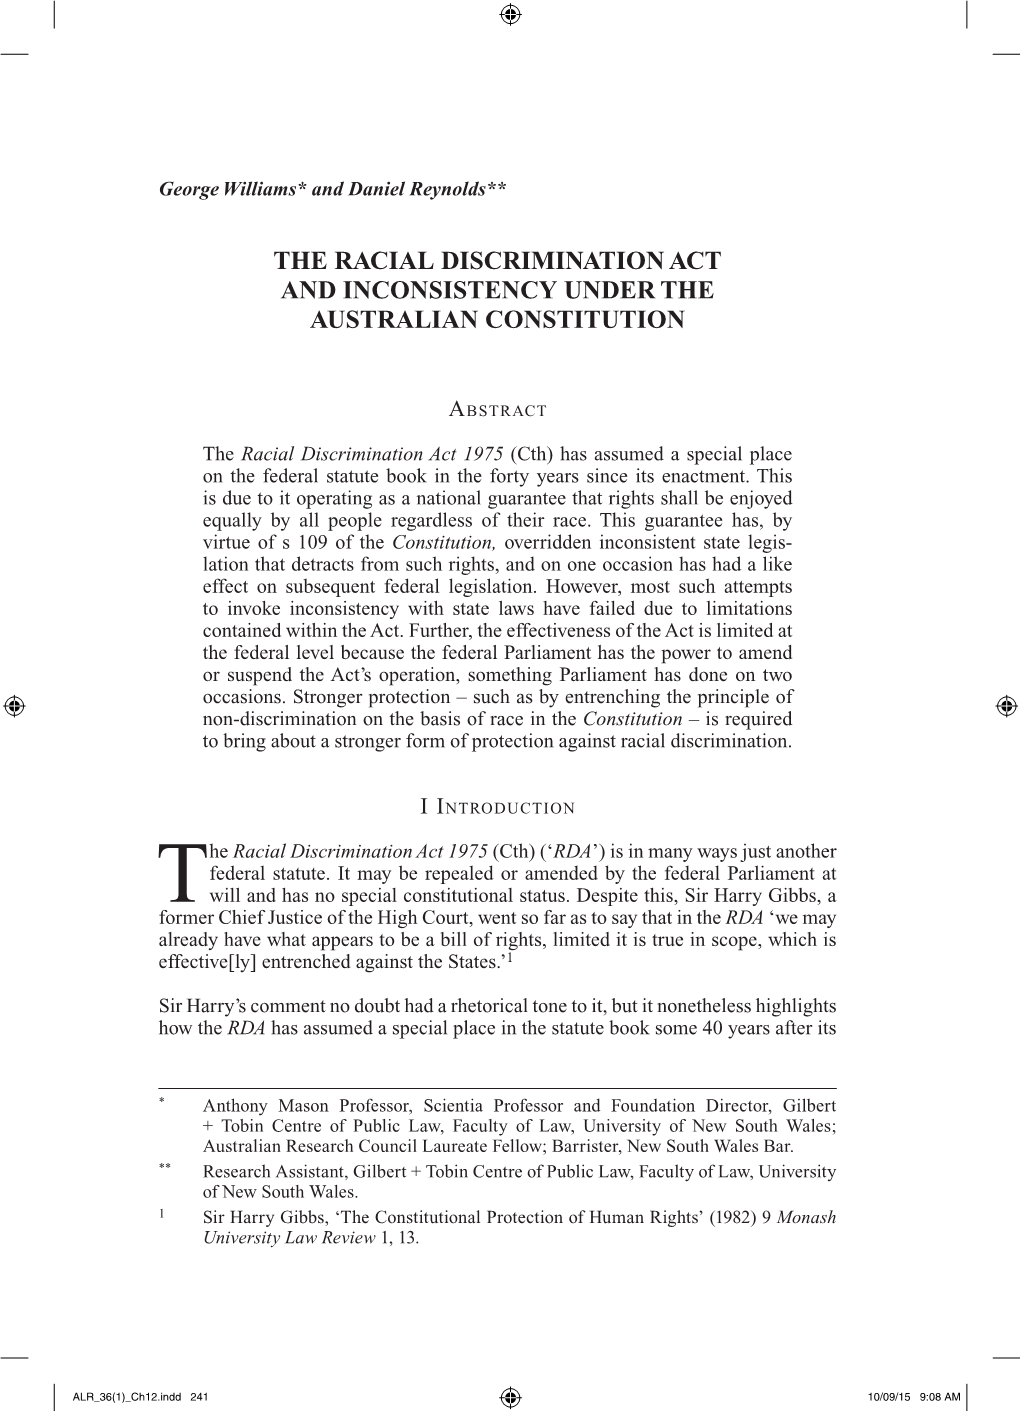 The Racial Discrimination Act and Inconsistency Under the Australian Constitution